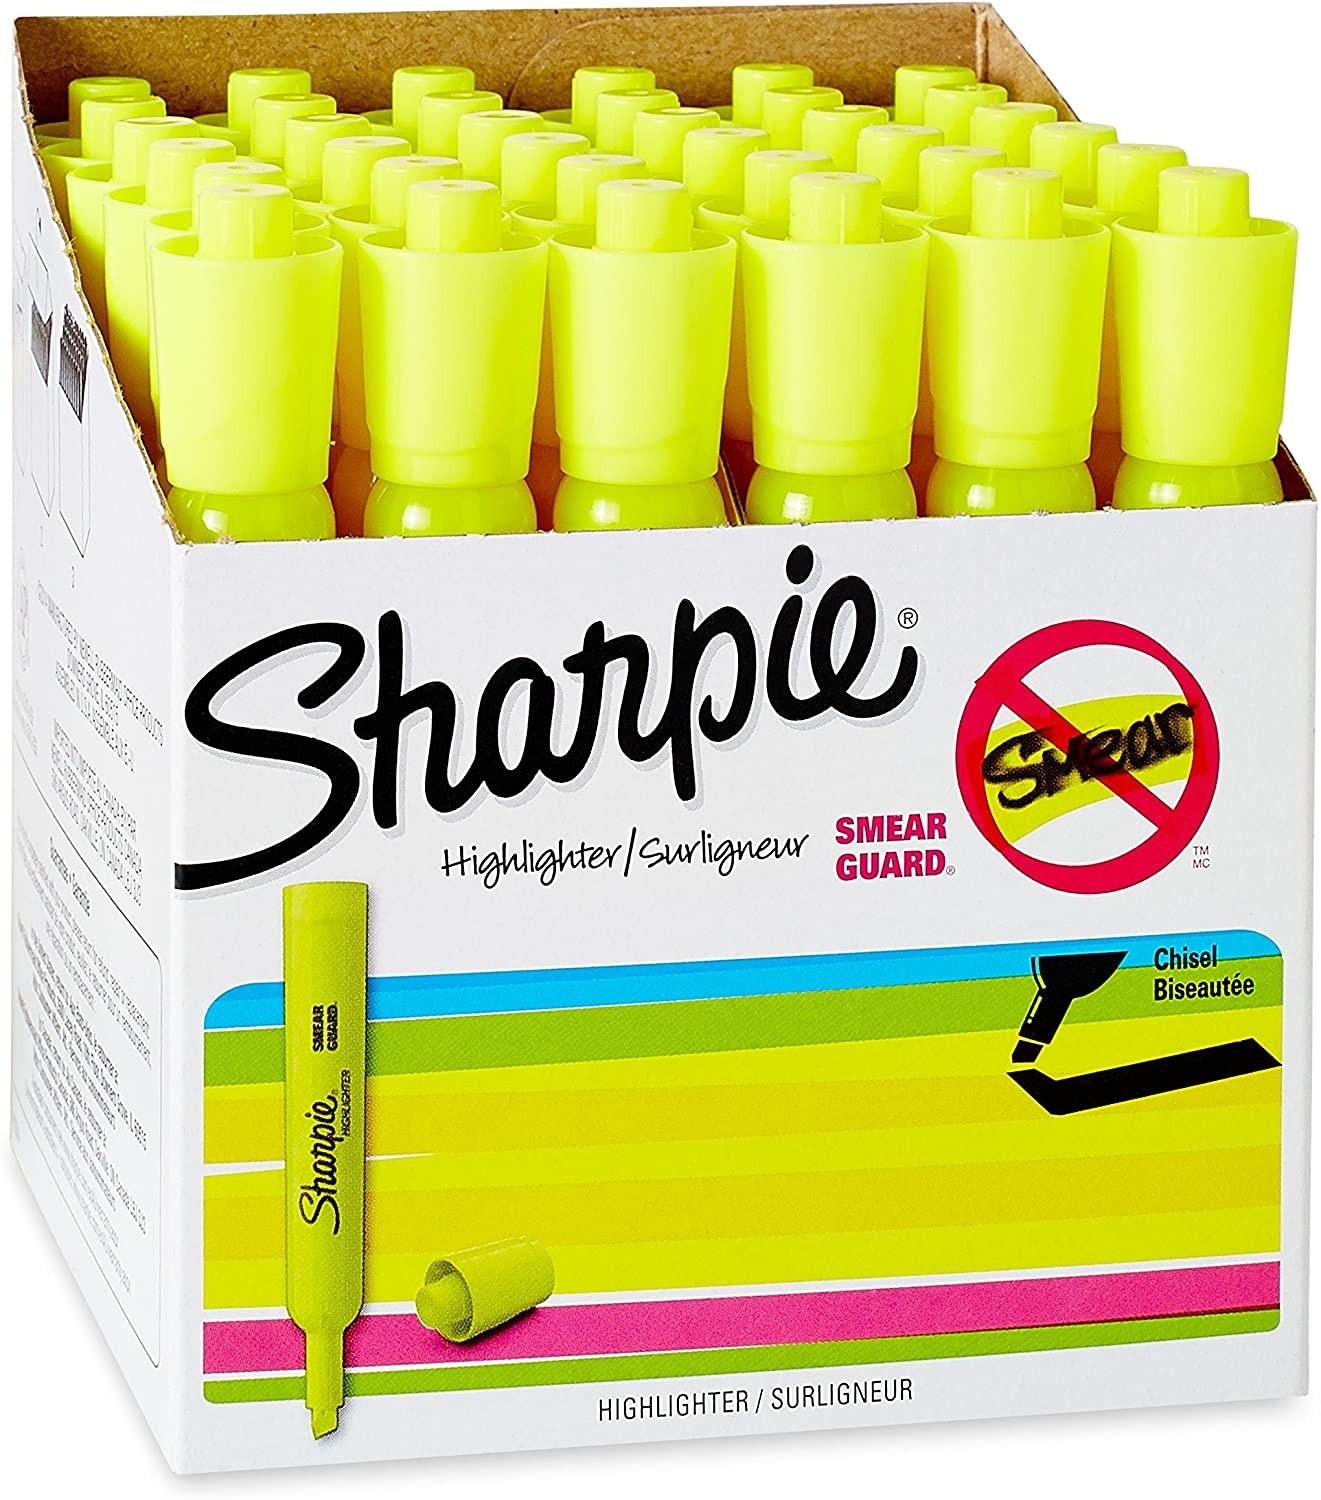 A box of fluorescent yellow highlighters